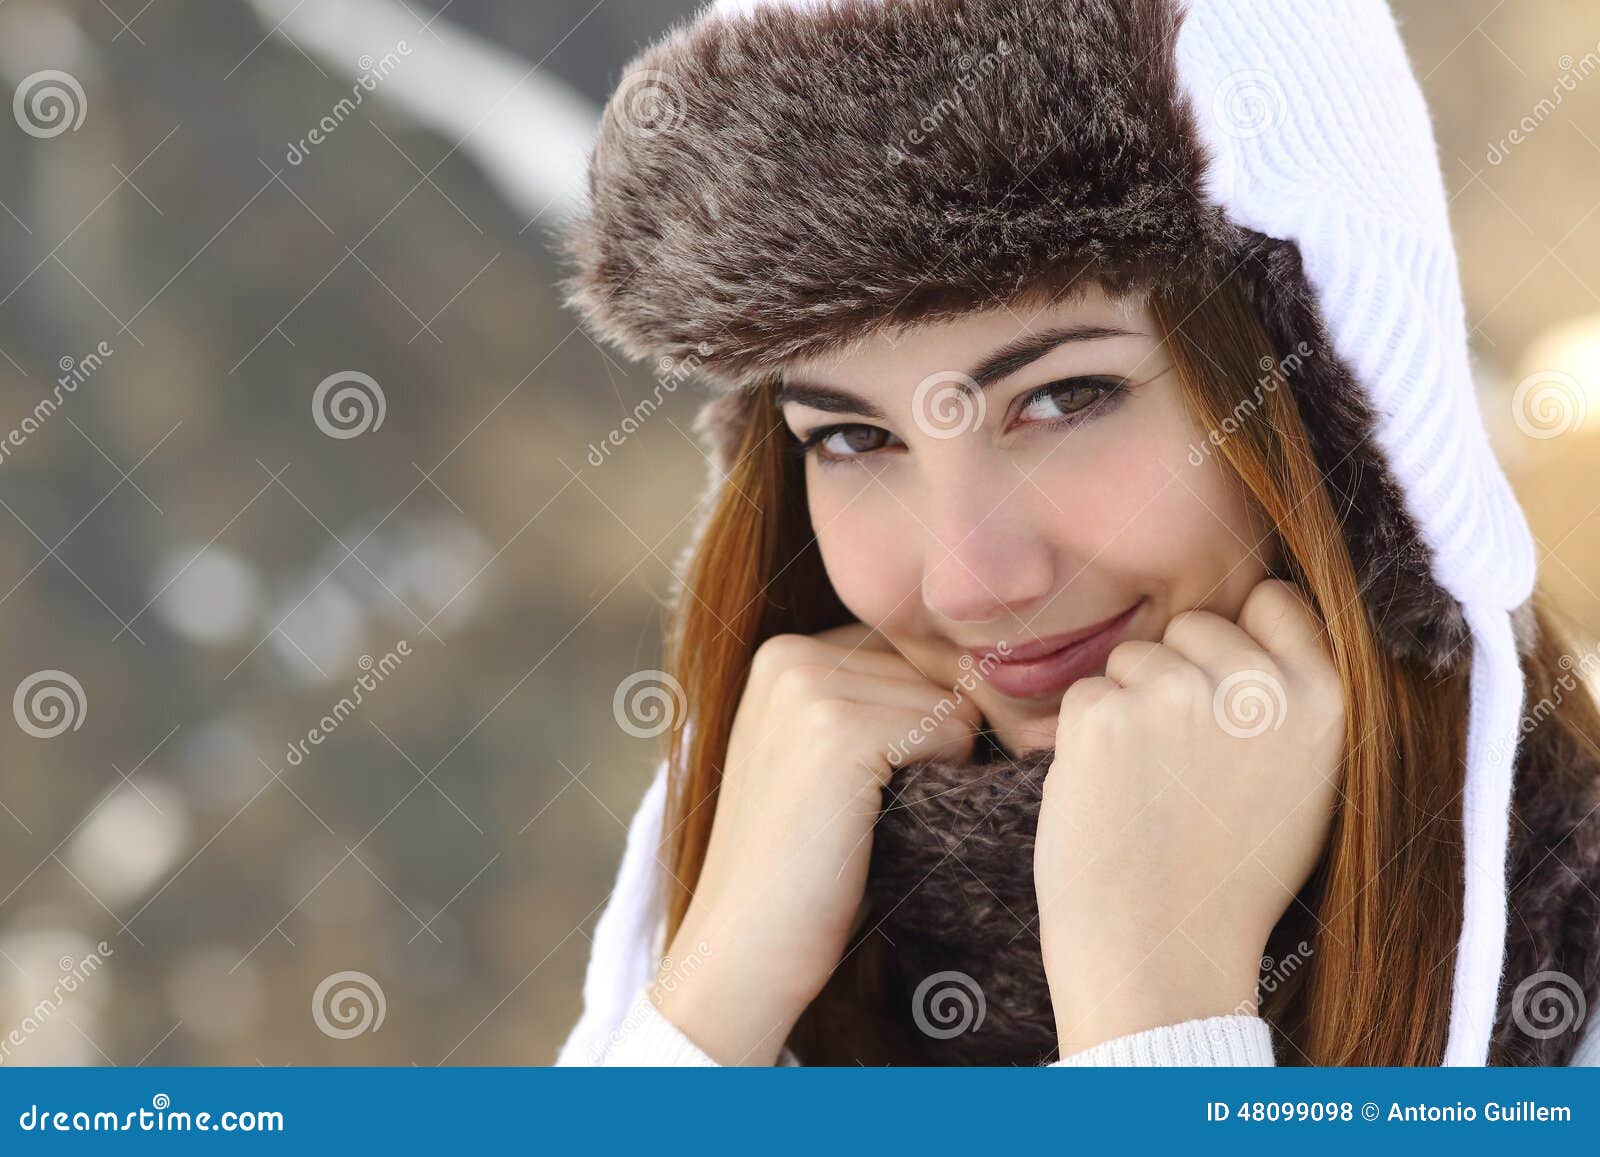 beauty woman face portrait warmly clothed in winter